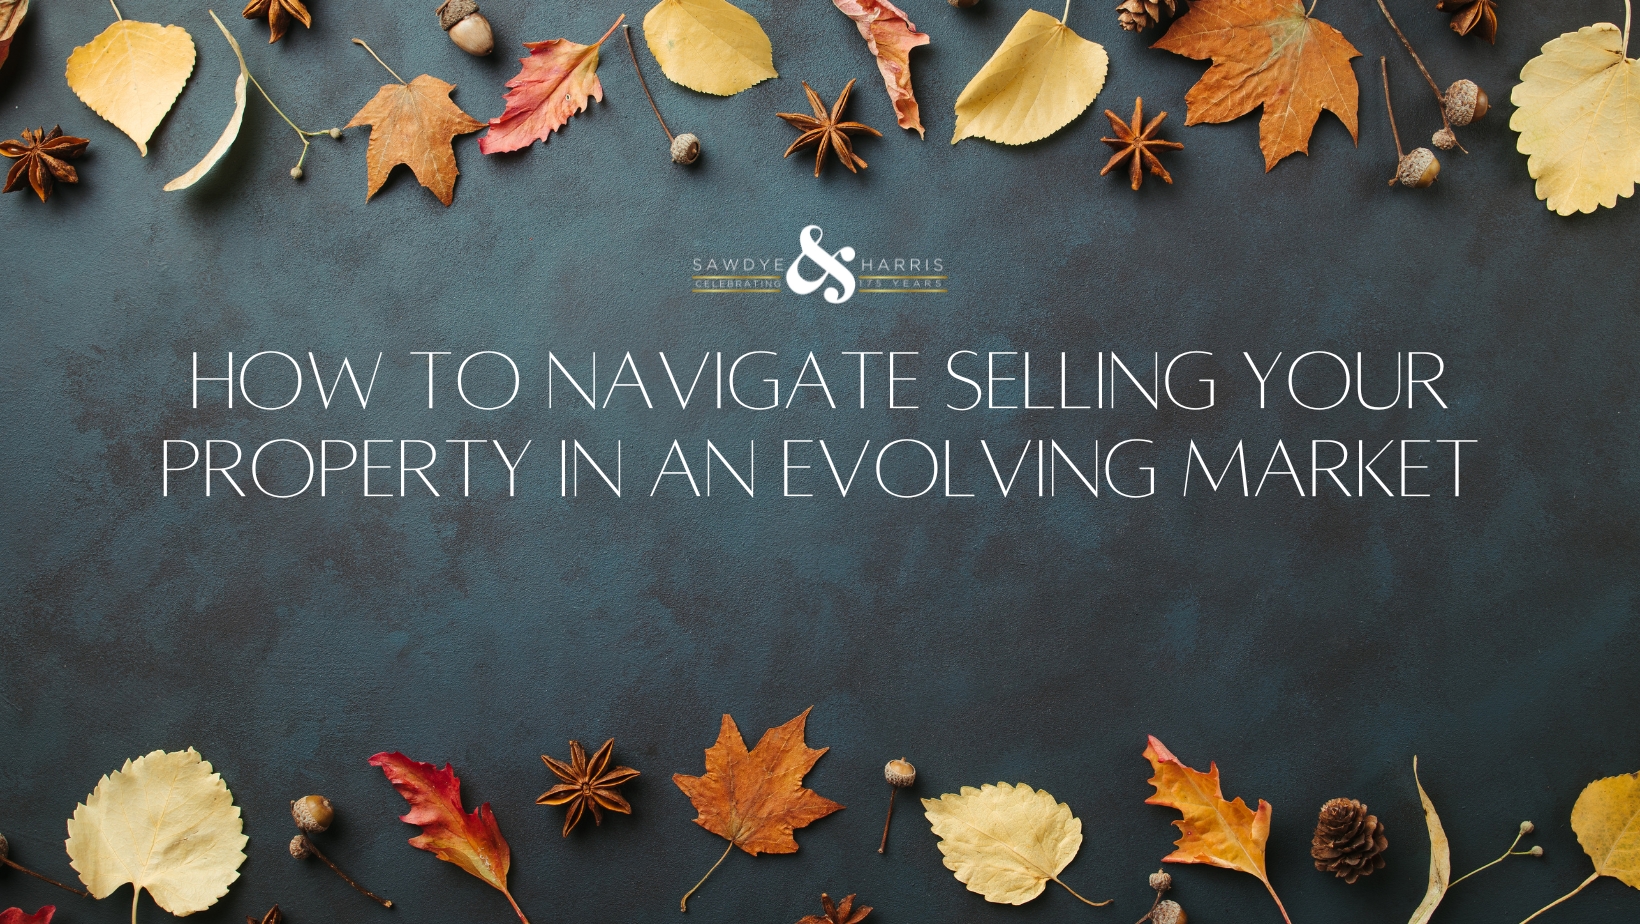 How to navigate selling your property in an evolving market